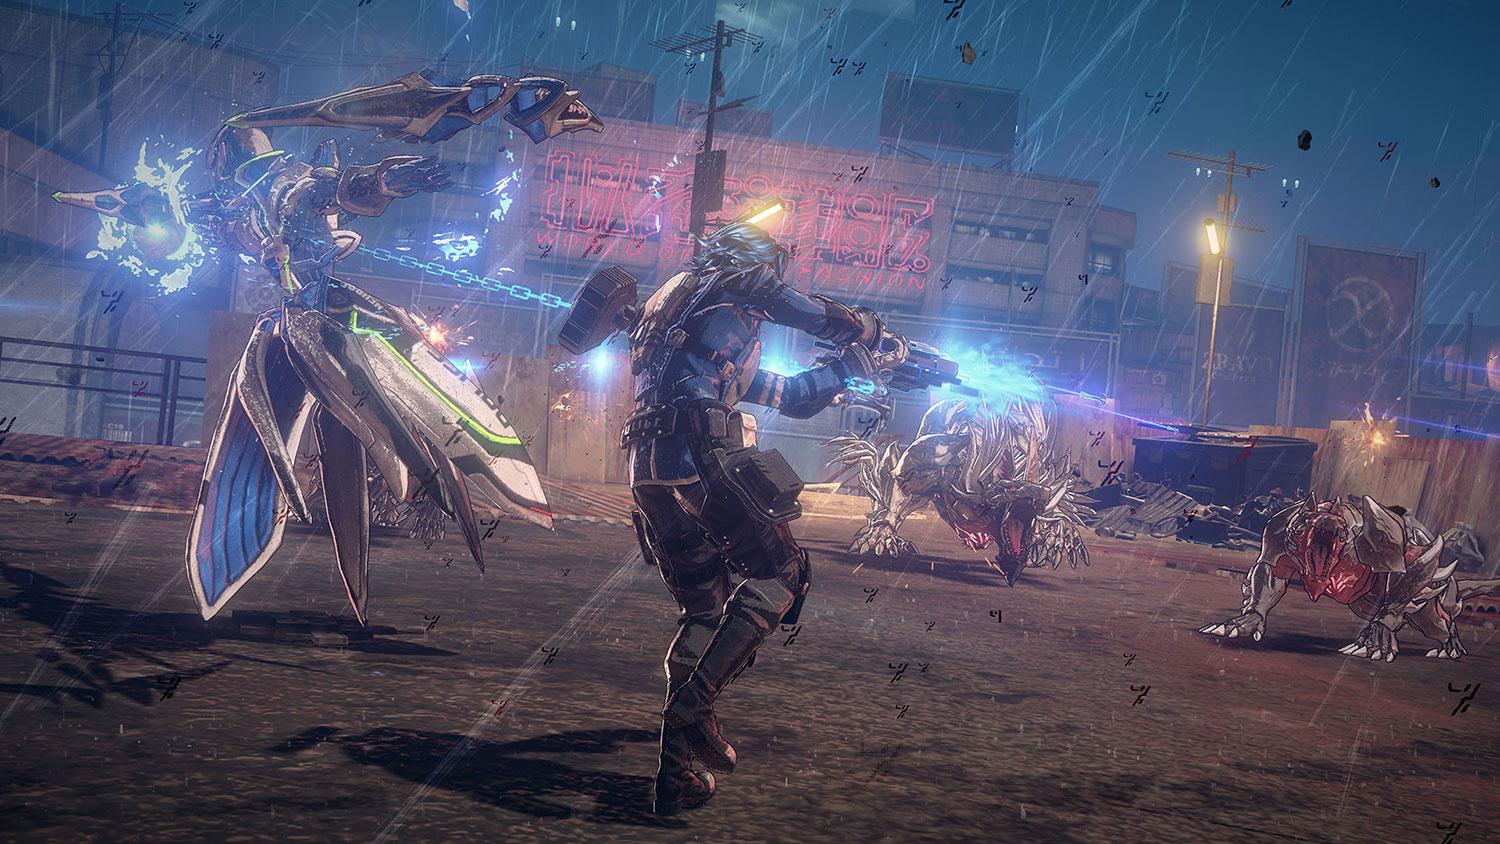 Astral Chain' is Looking Like it Deserves a Citation